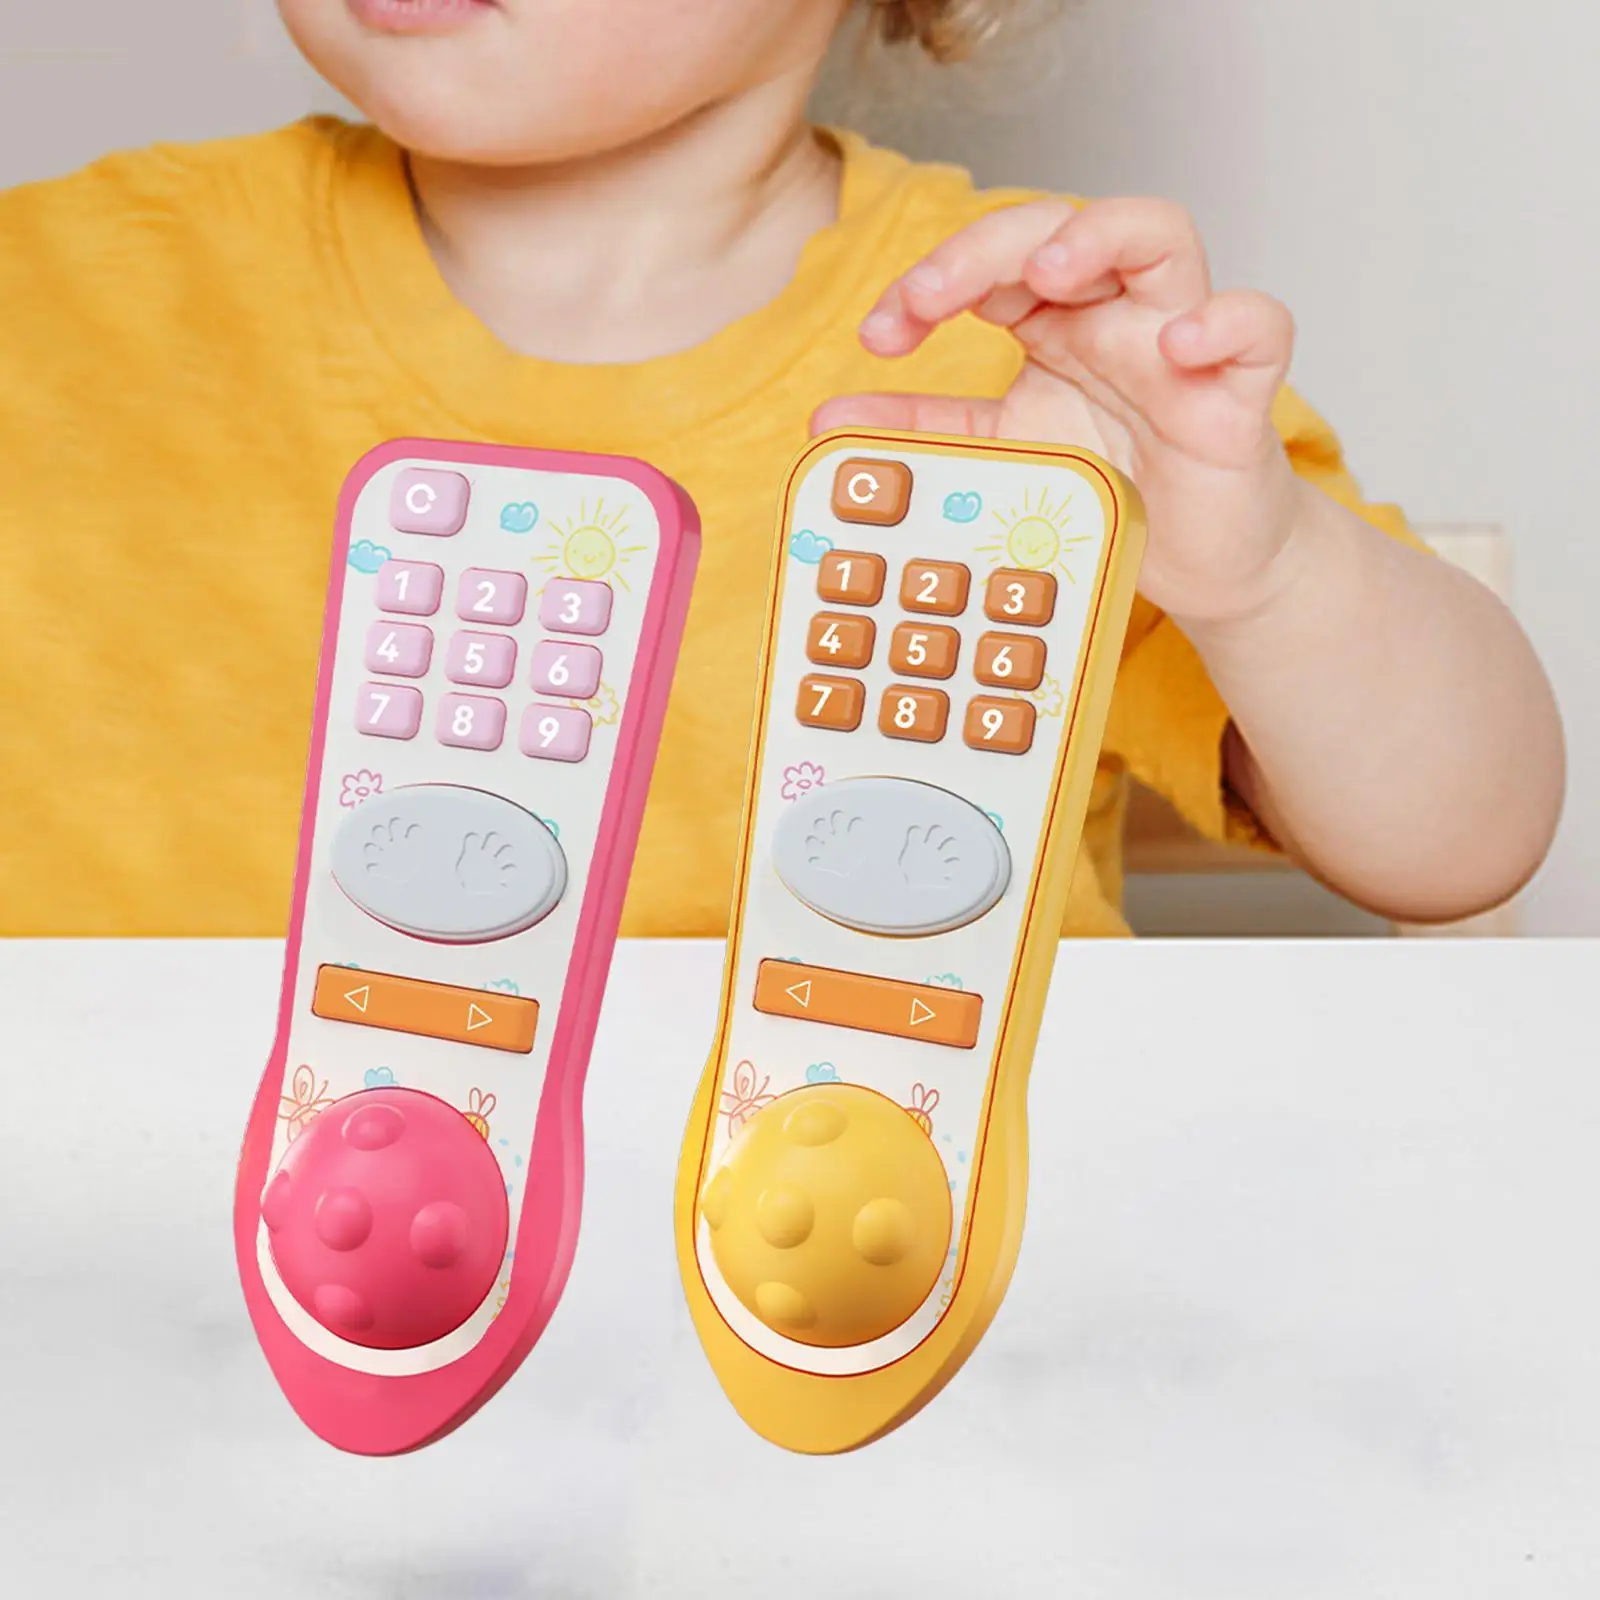 TV Remote Control Toy with Soft Light and Sound Learning Remote Toy for Boys Girls 12 to 18 Months Toddler Baby Birthday Gifts